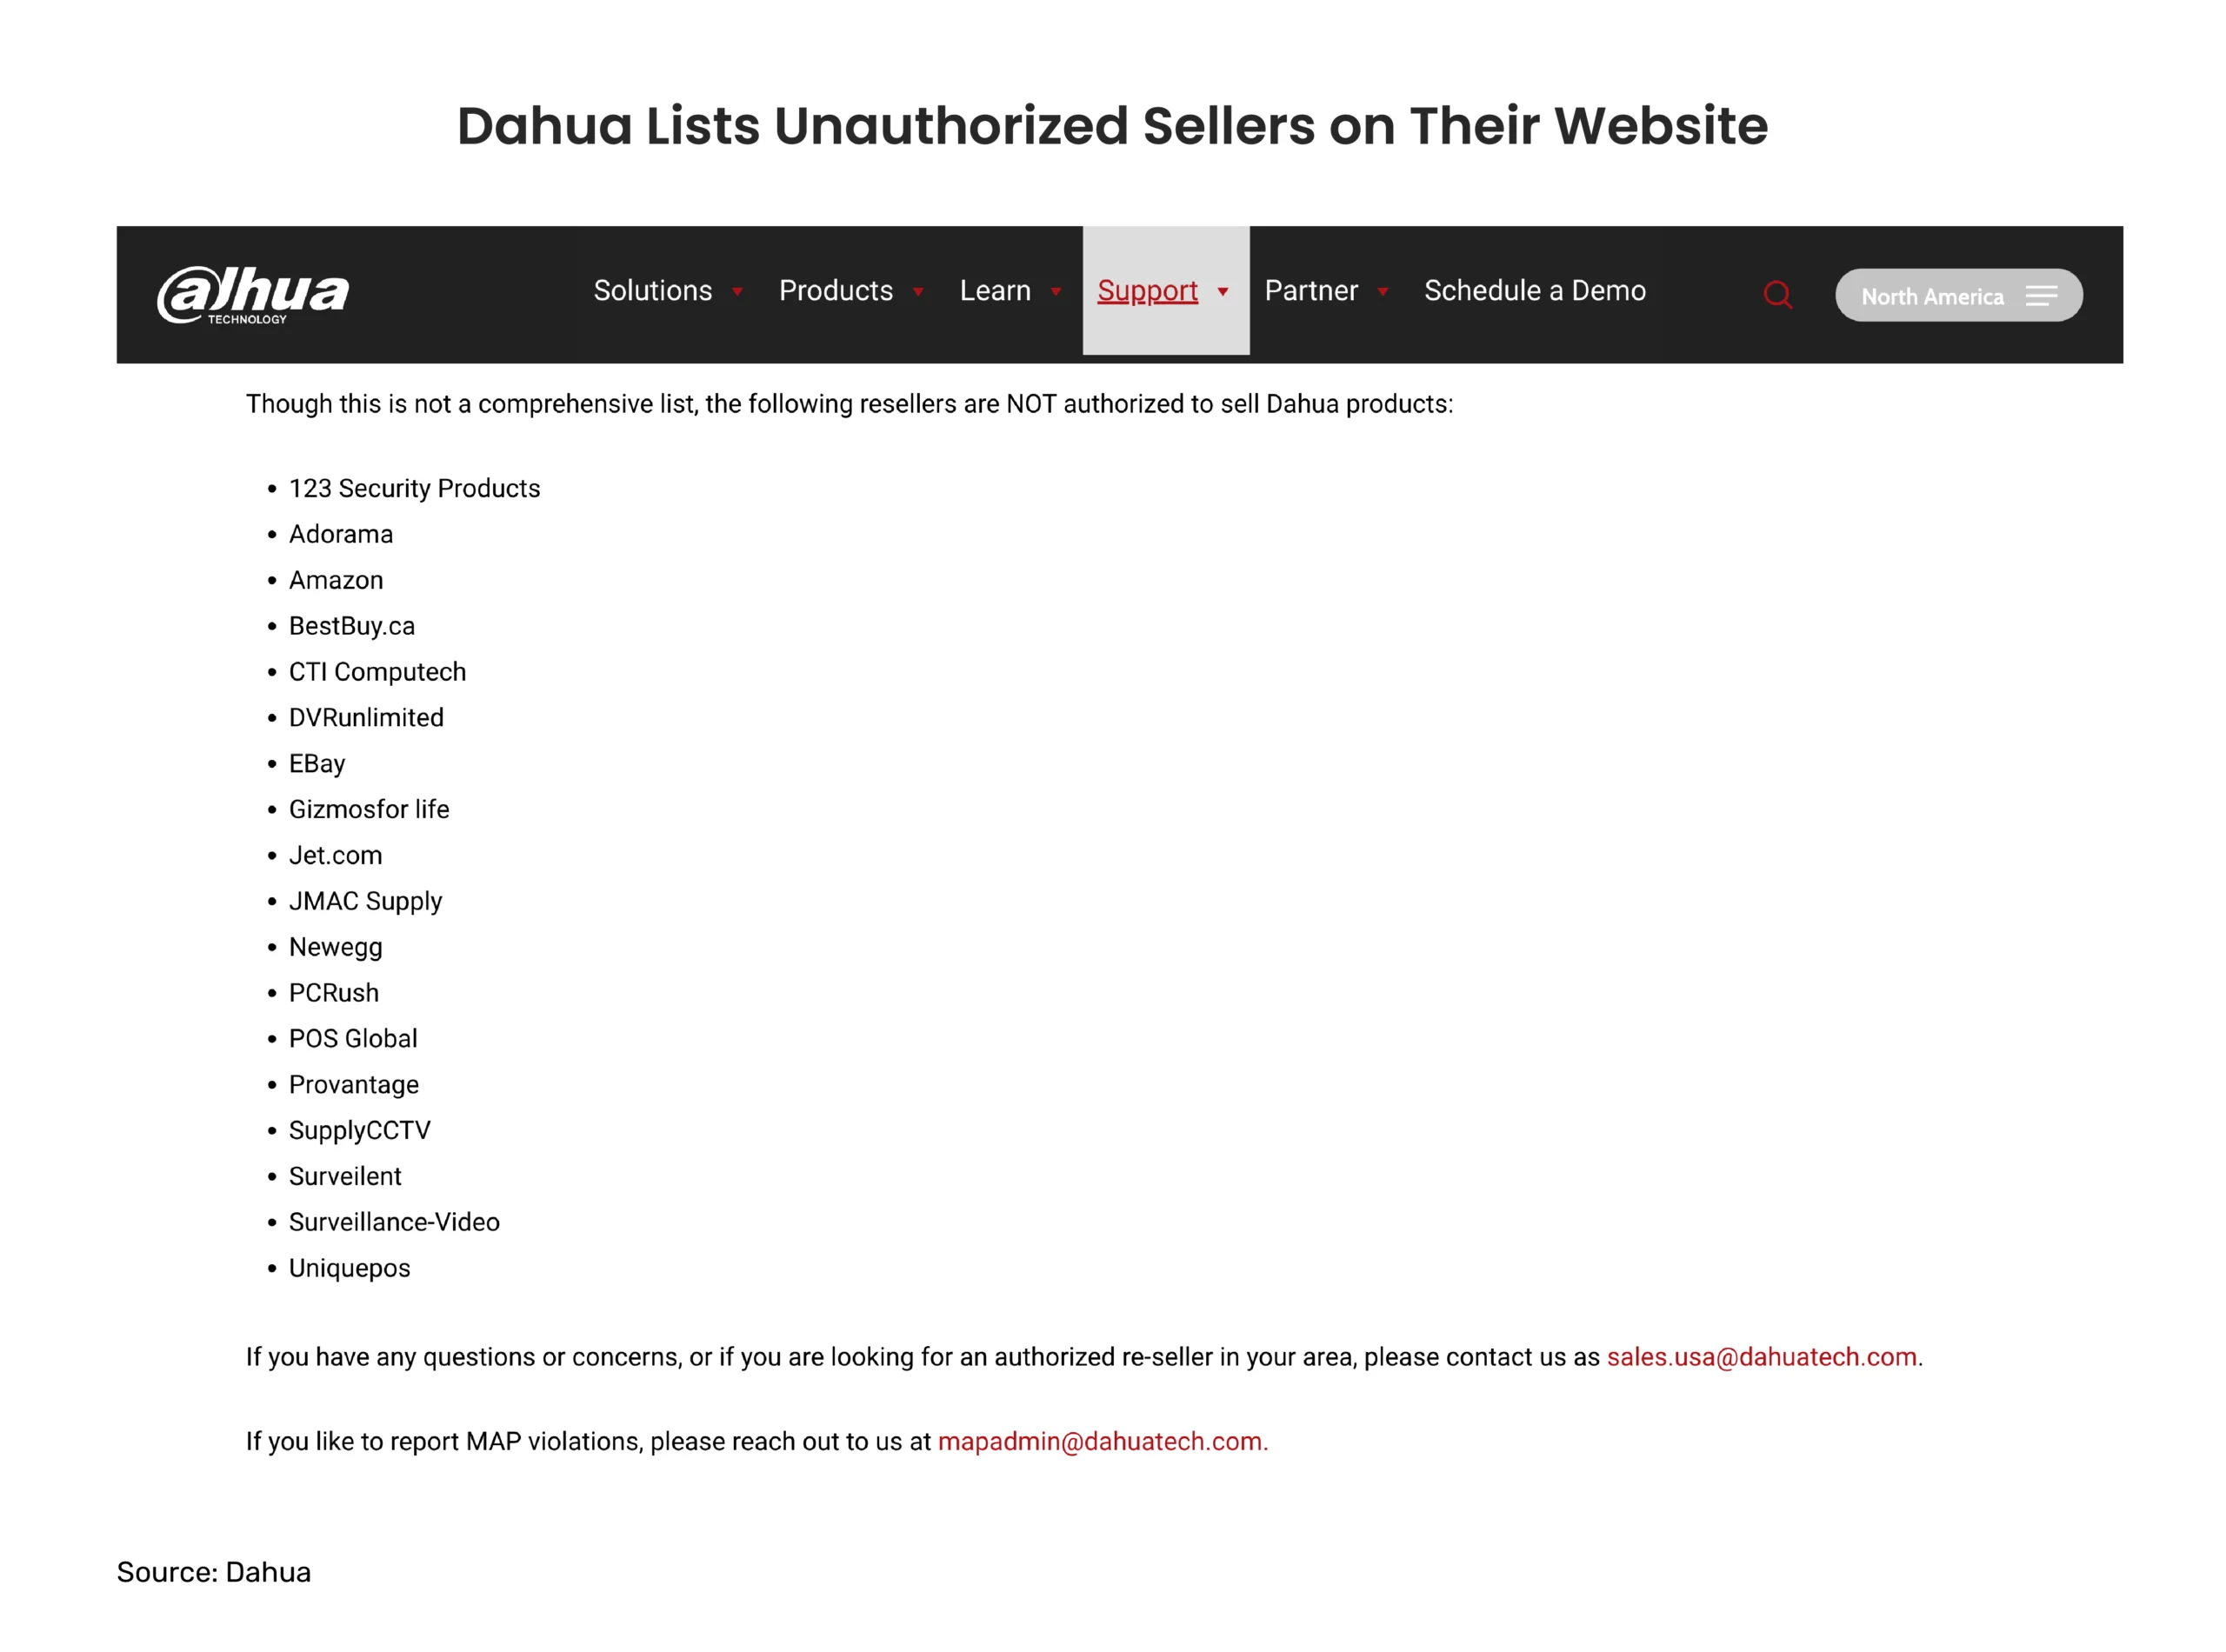 the image shows Dahua's website with the list of unauthorized sellers